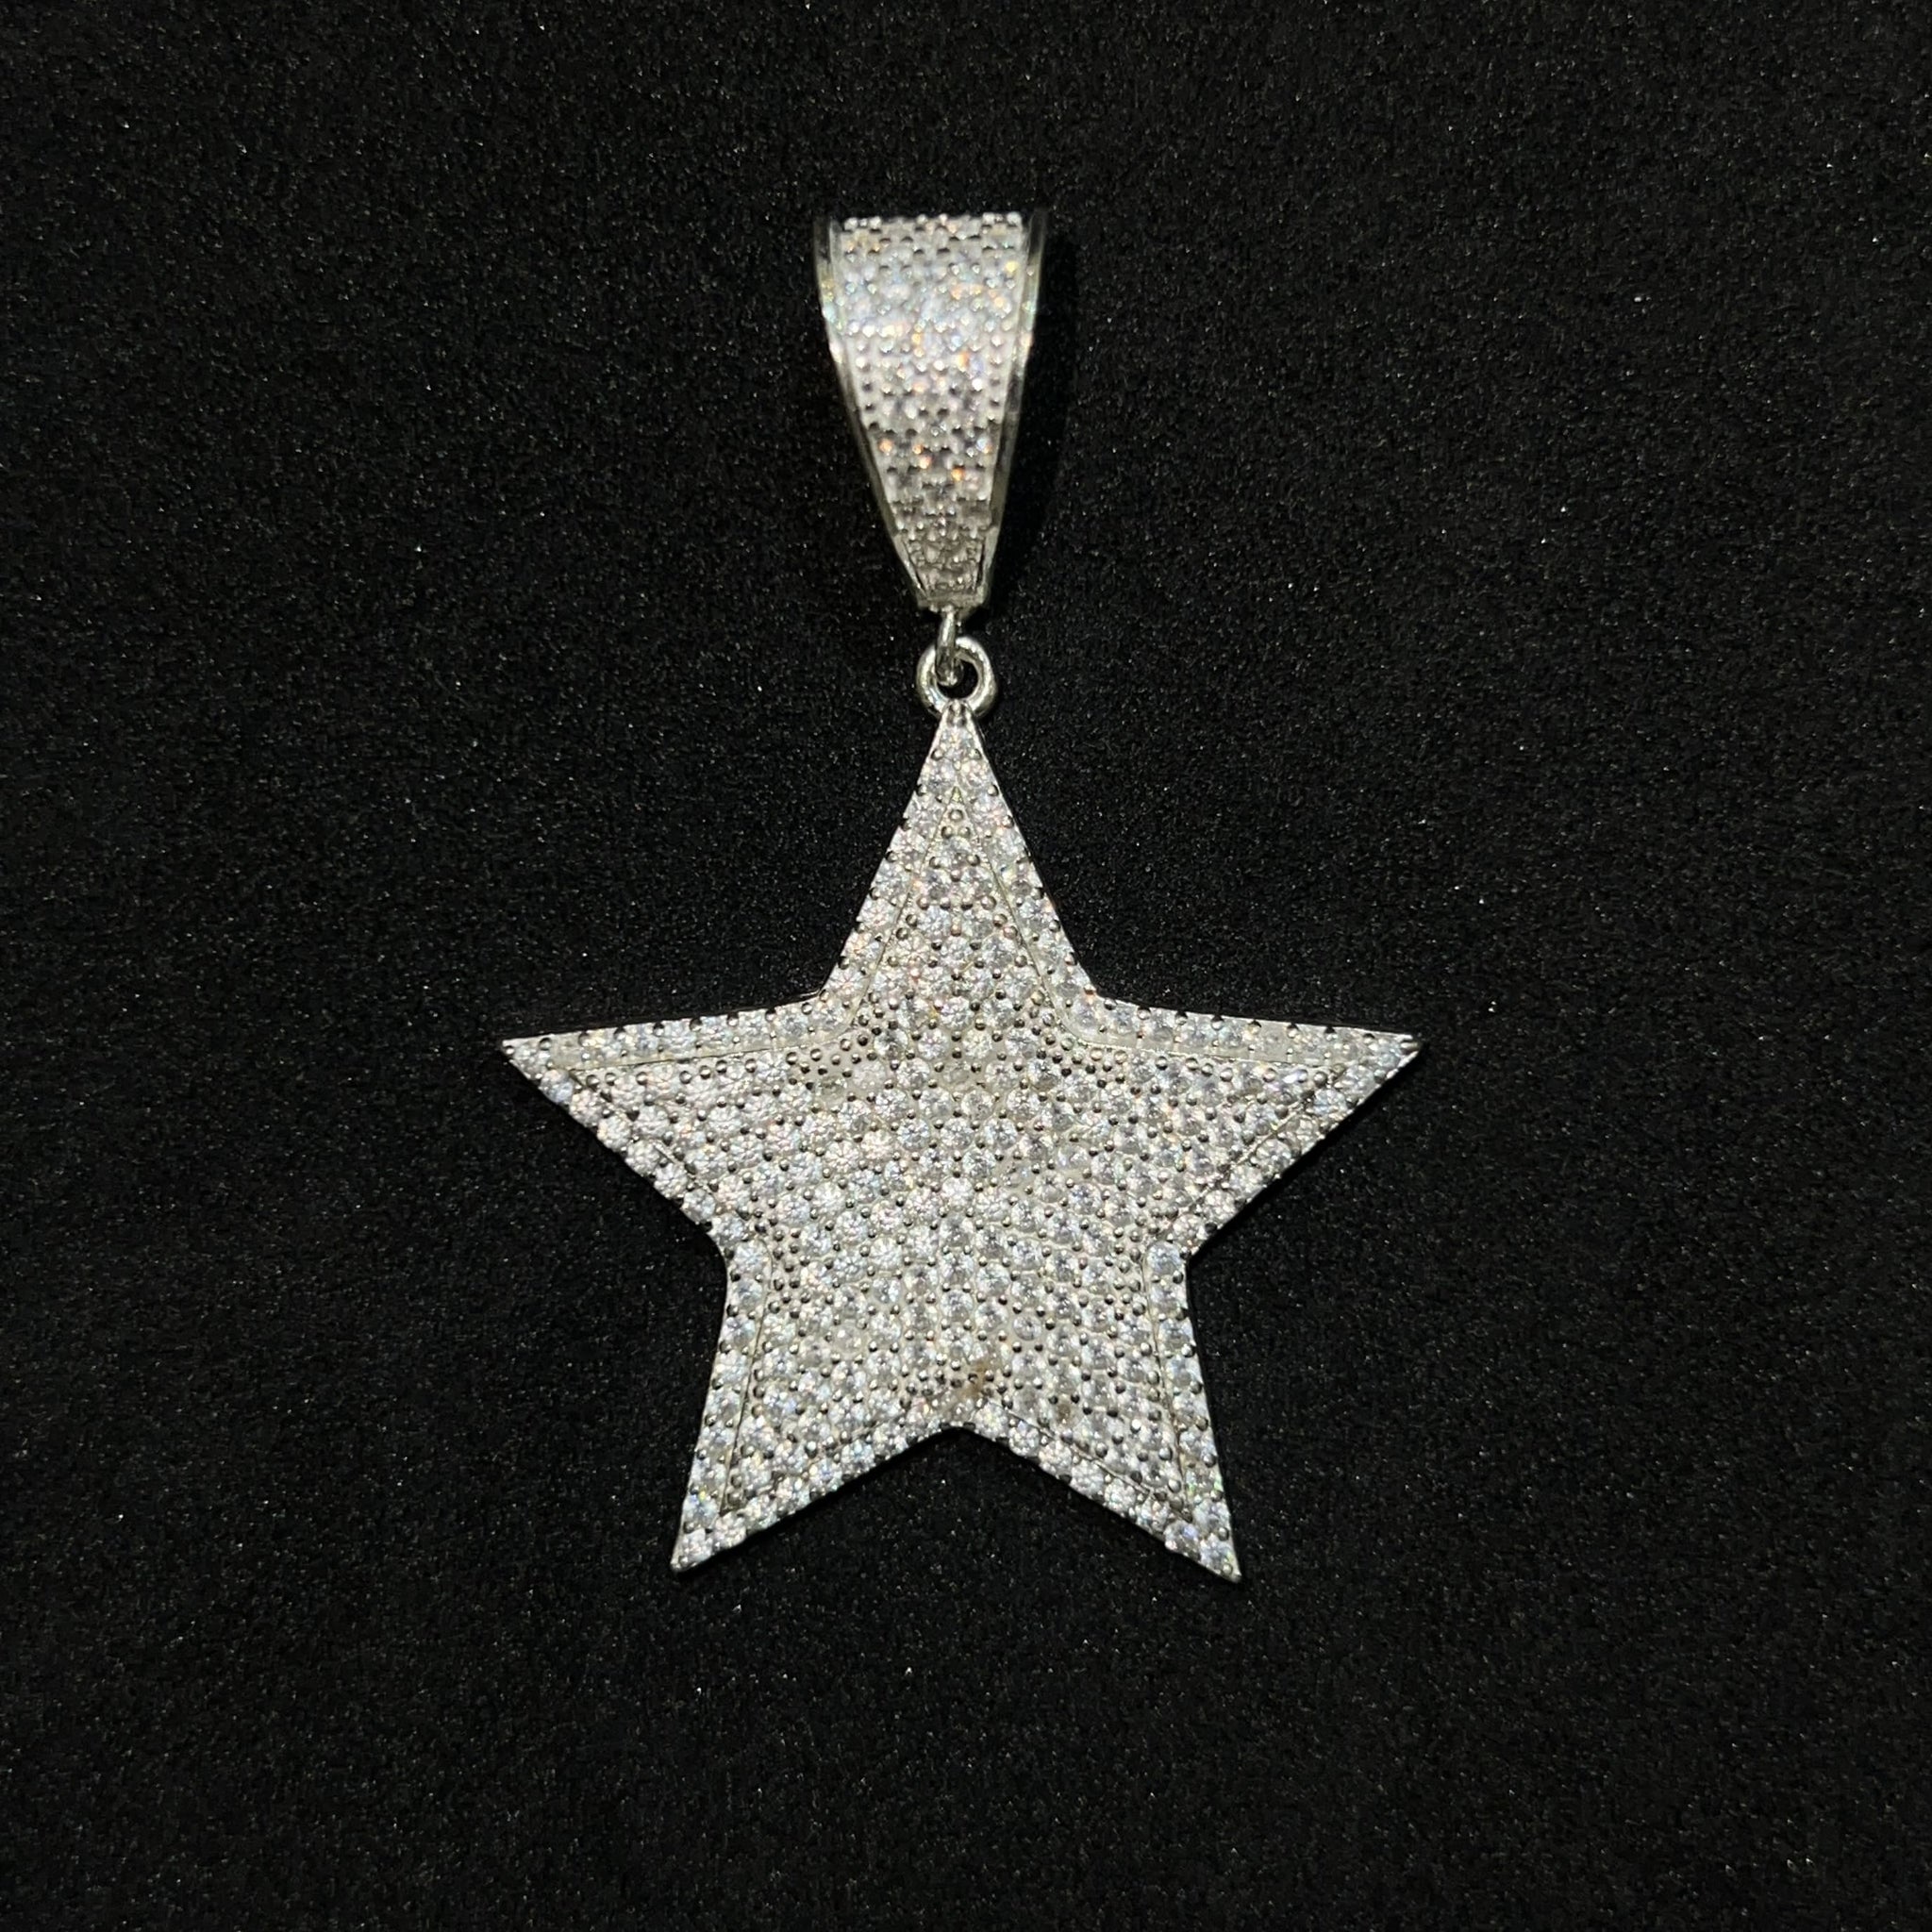 Star Pendant - Iced Out - Silver 925